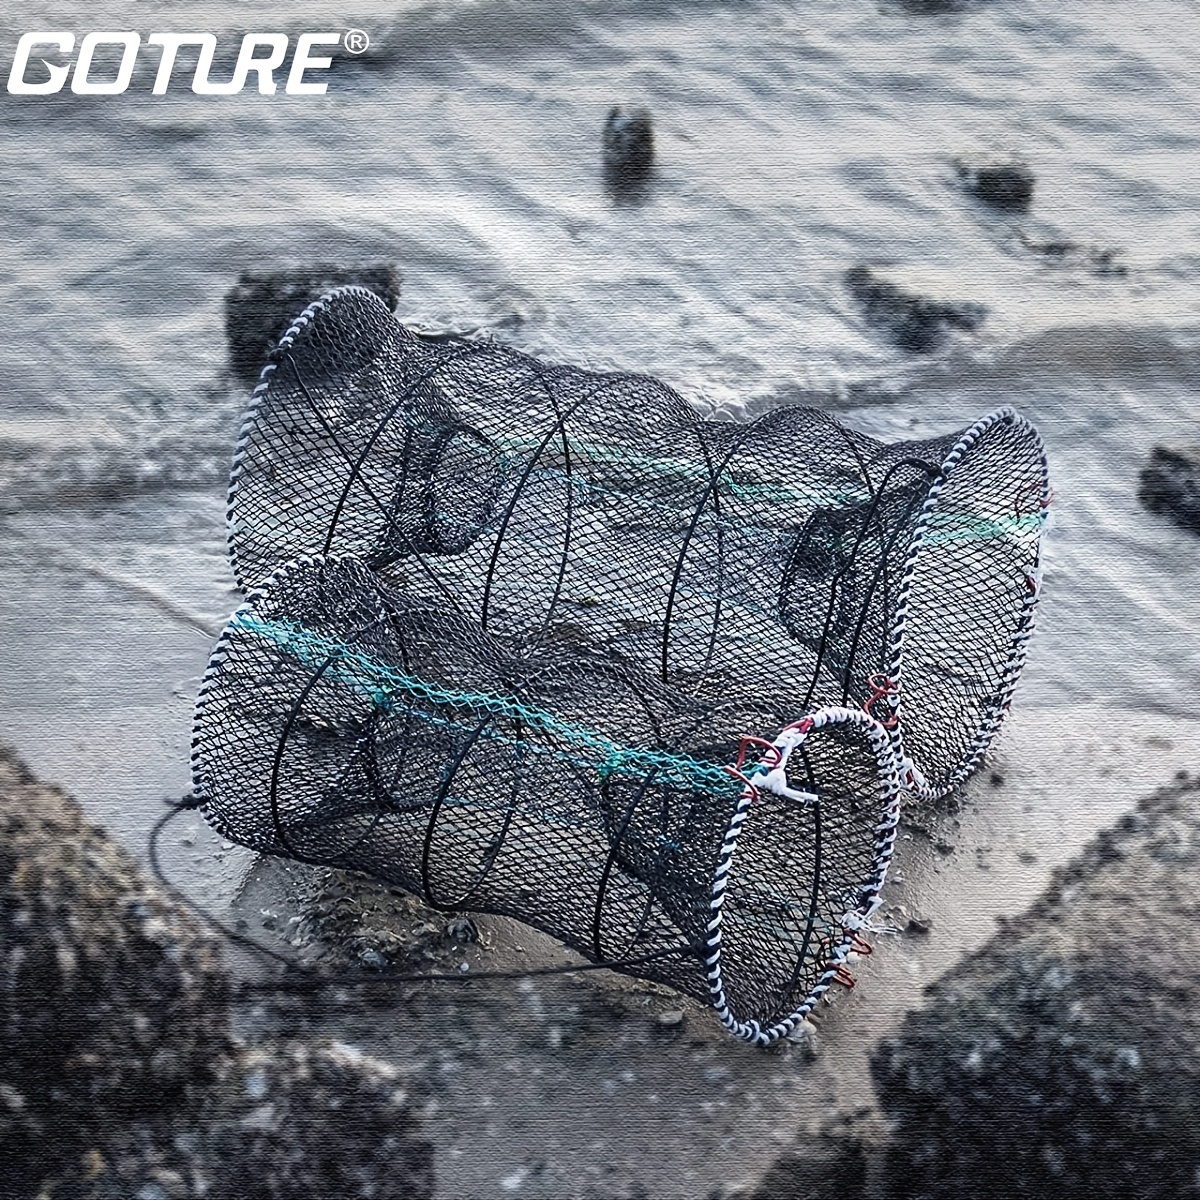 How To Rig Your Portable Crab Trap With Bait 